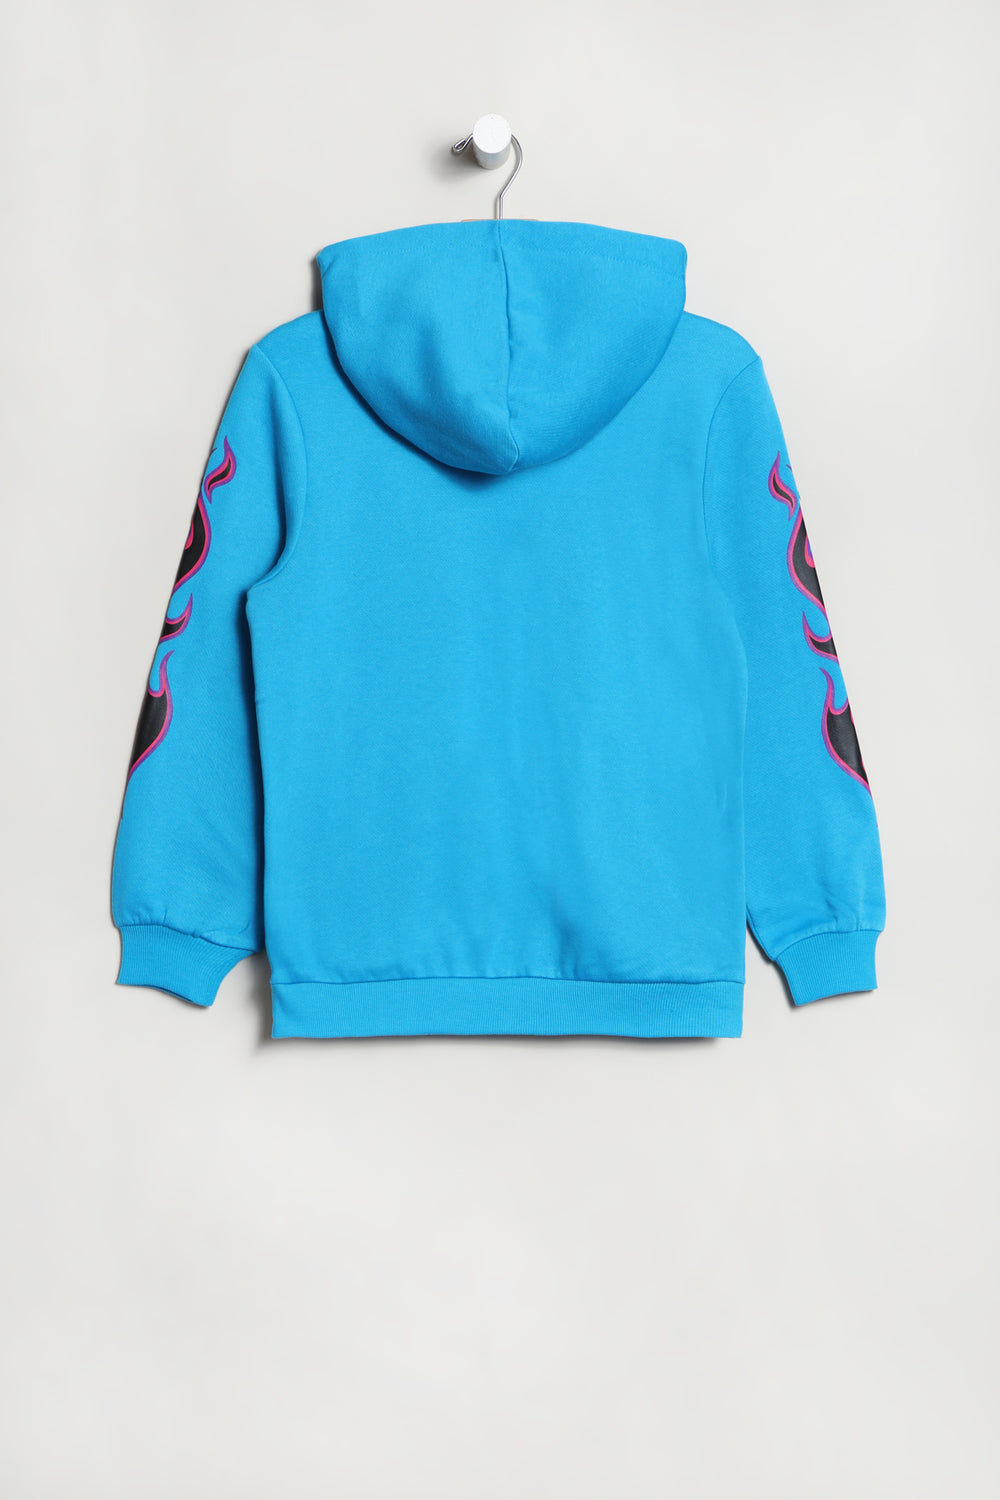 West49 Youth Flame Hoodie Blue